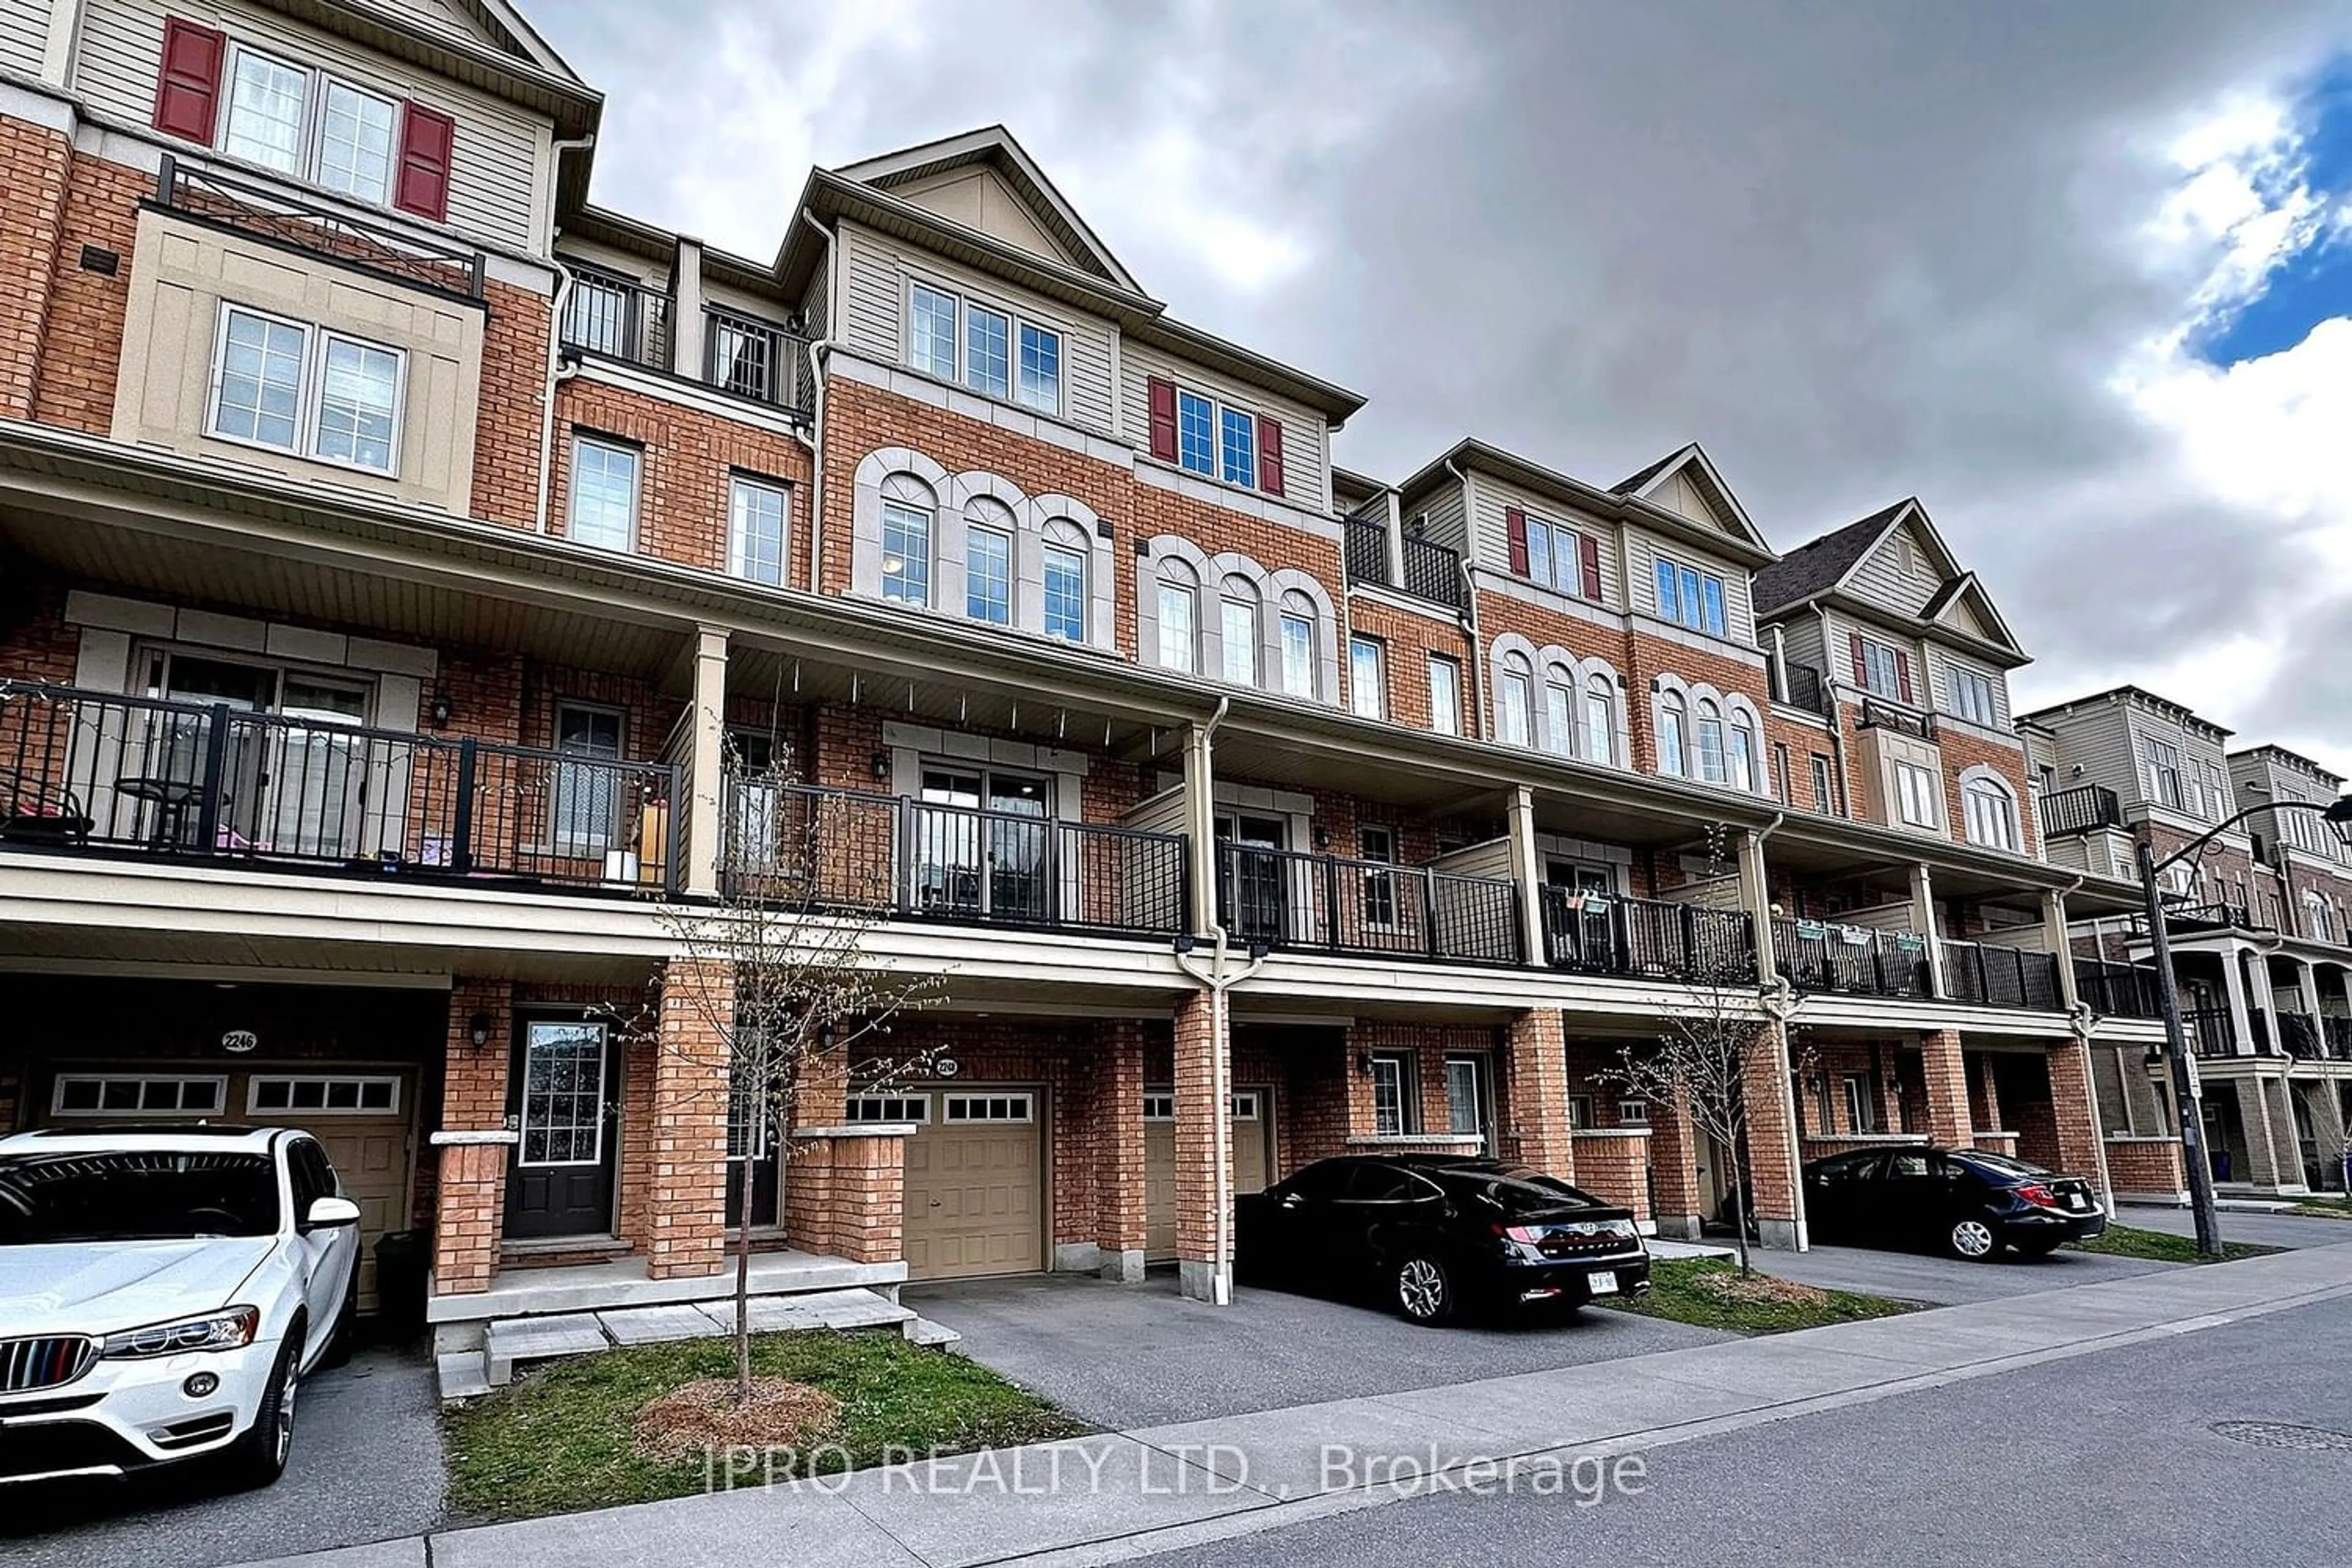 A pic from exterior of the house or condo for 2248 Chevron Prince Path, Oshawa Ontario L1L 0K8